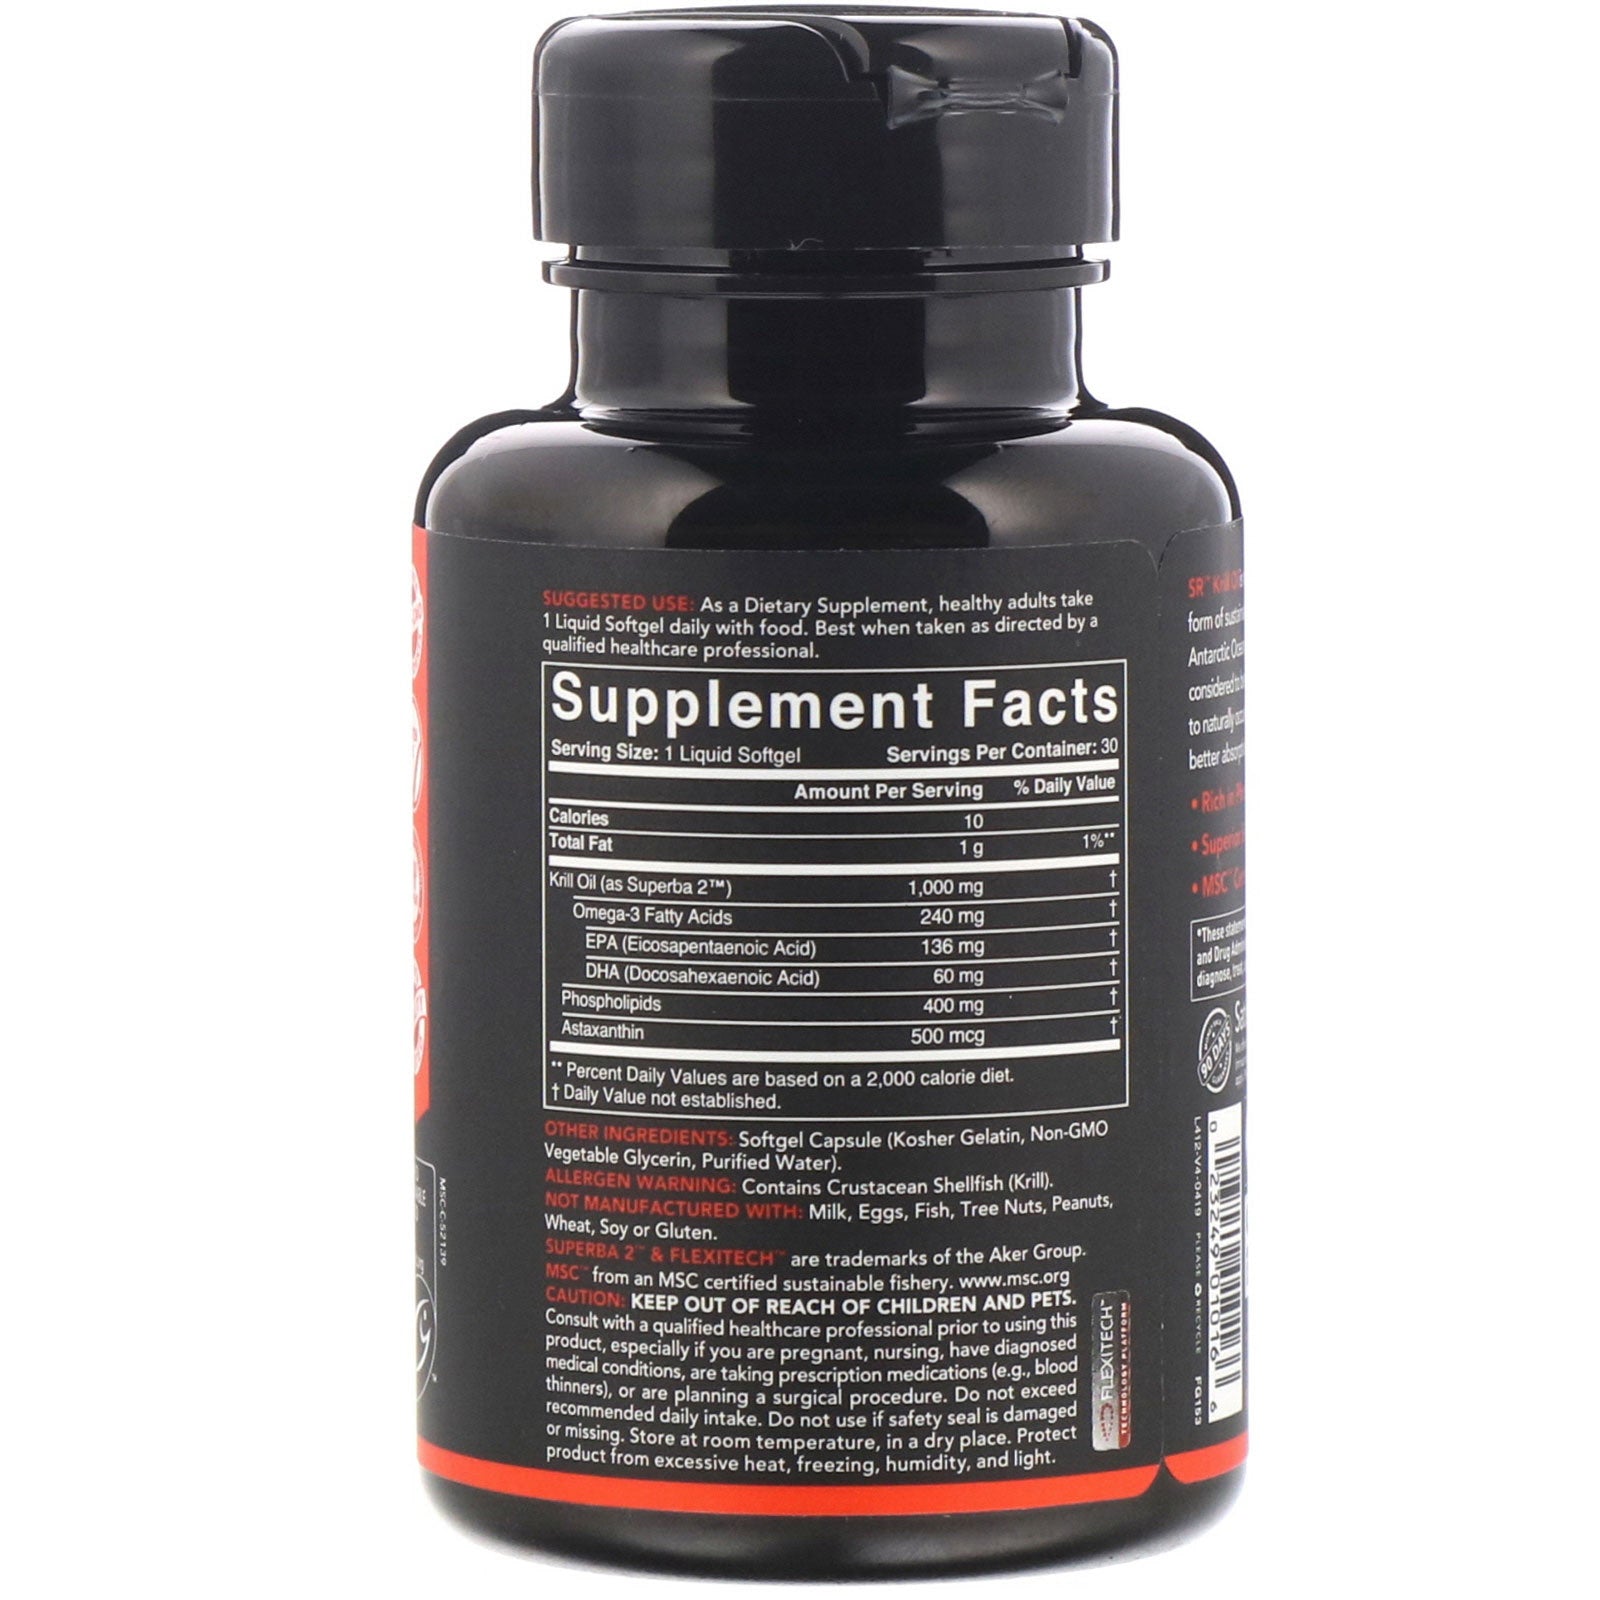 Sports Research, SUPERBA 2 Antarctic Krill Oil with Astaxanthin, 1,000 mg, 30 Softgels